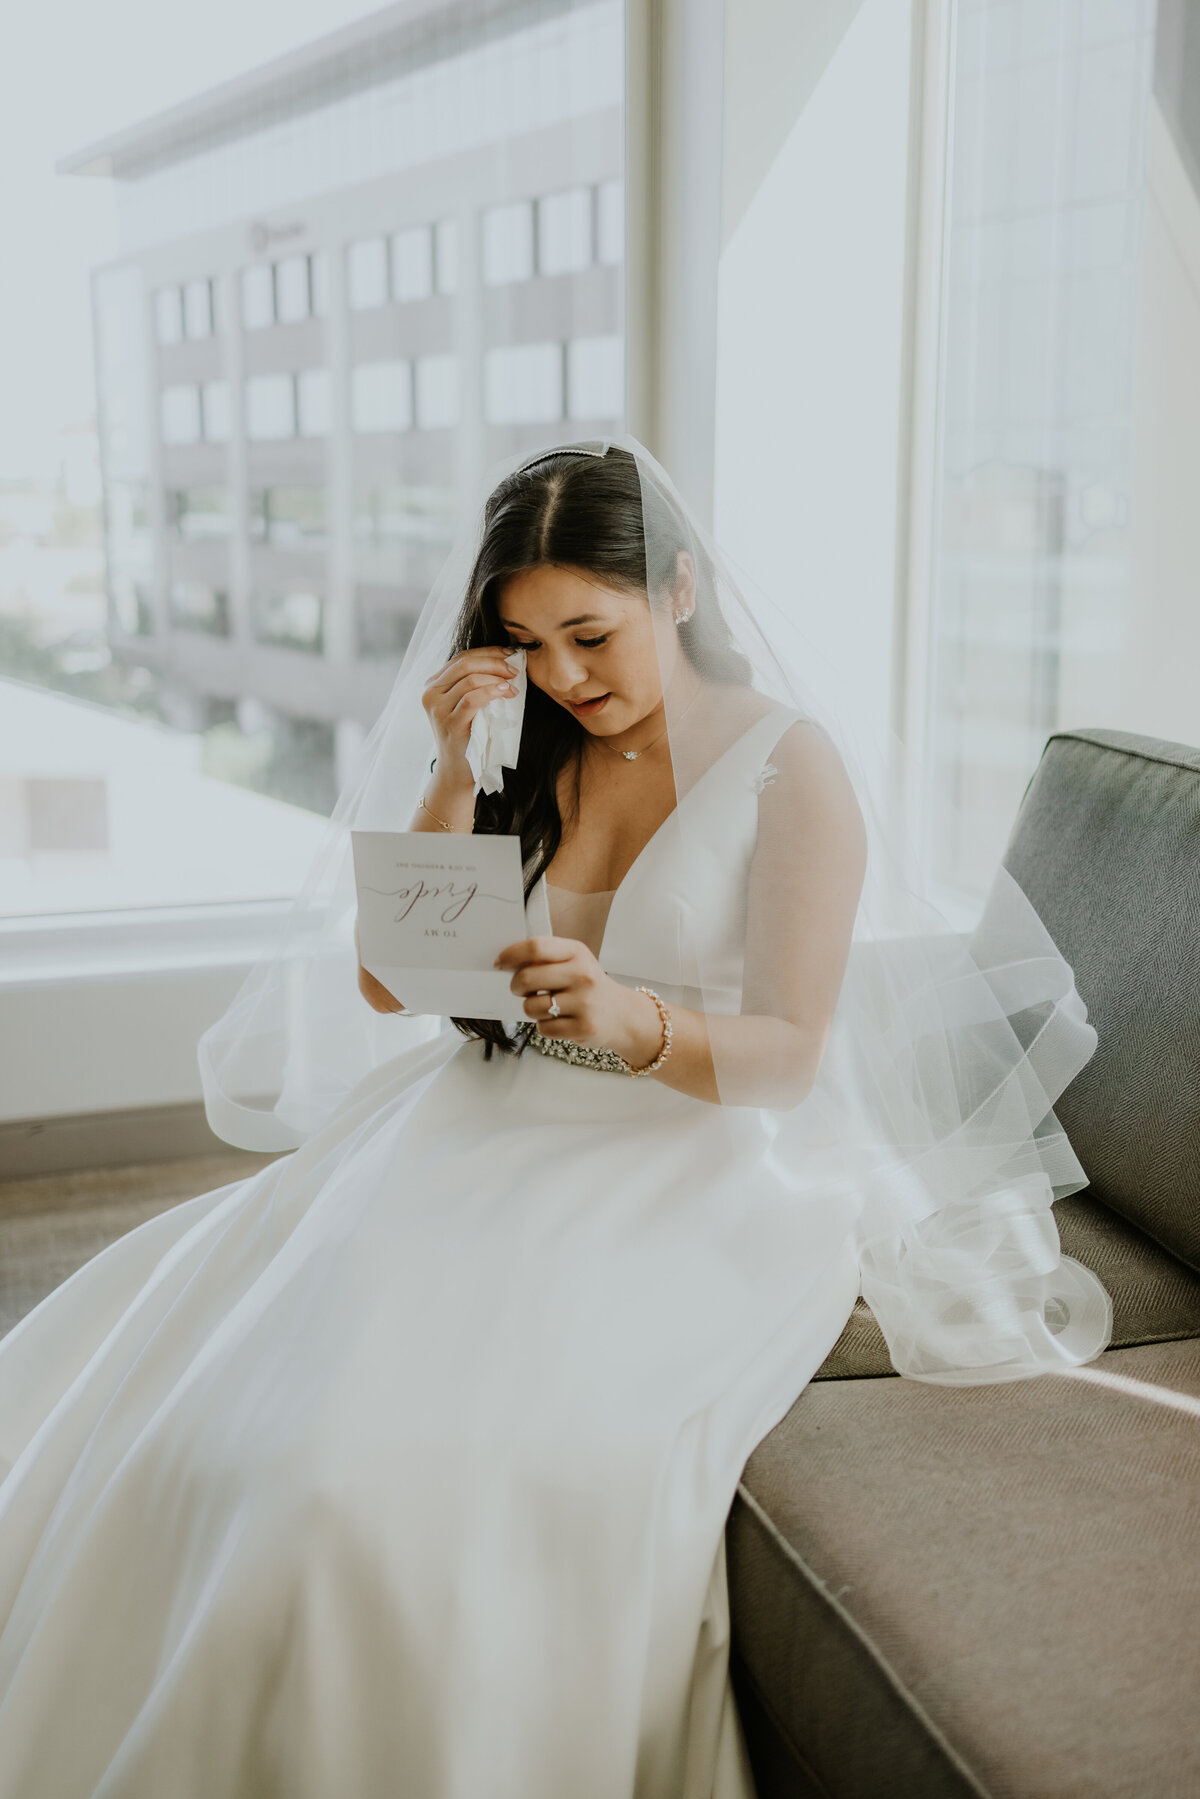 Bride becoming emotional reading vows on wedding day Temecula, California Wedding photographer Yescphotography